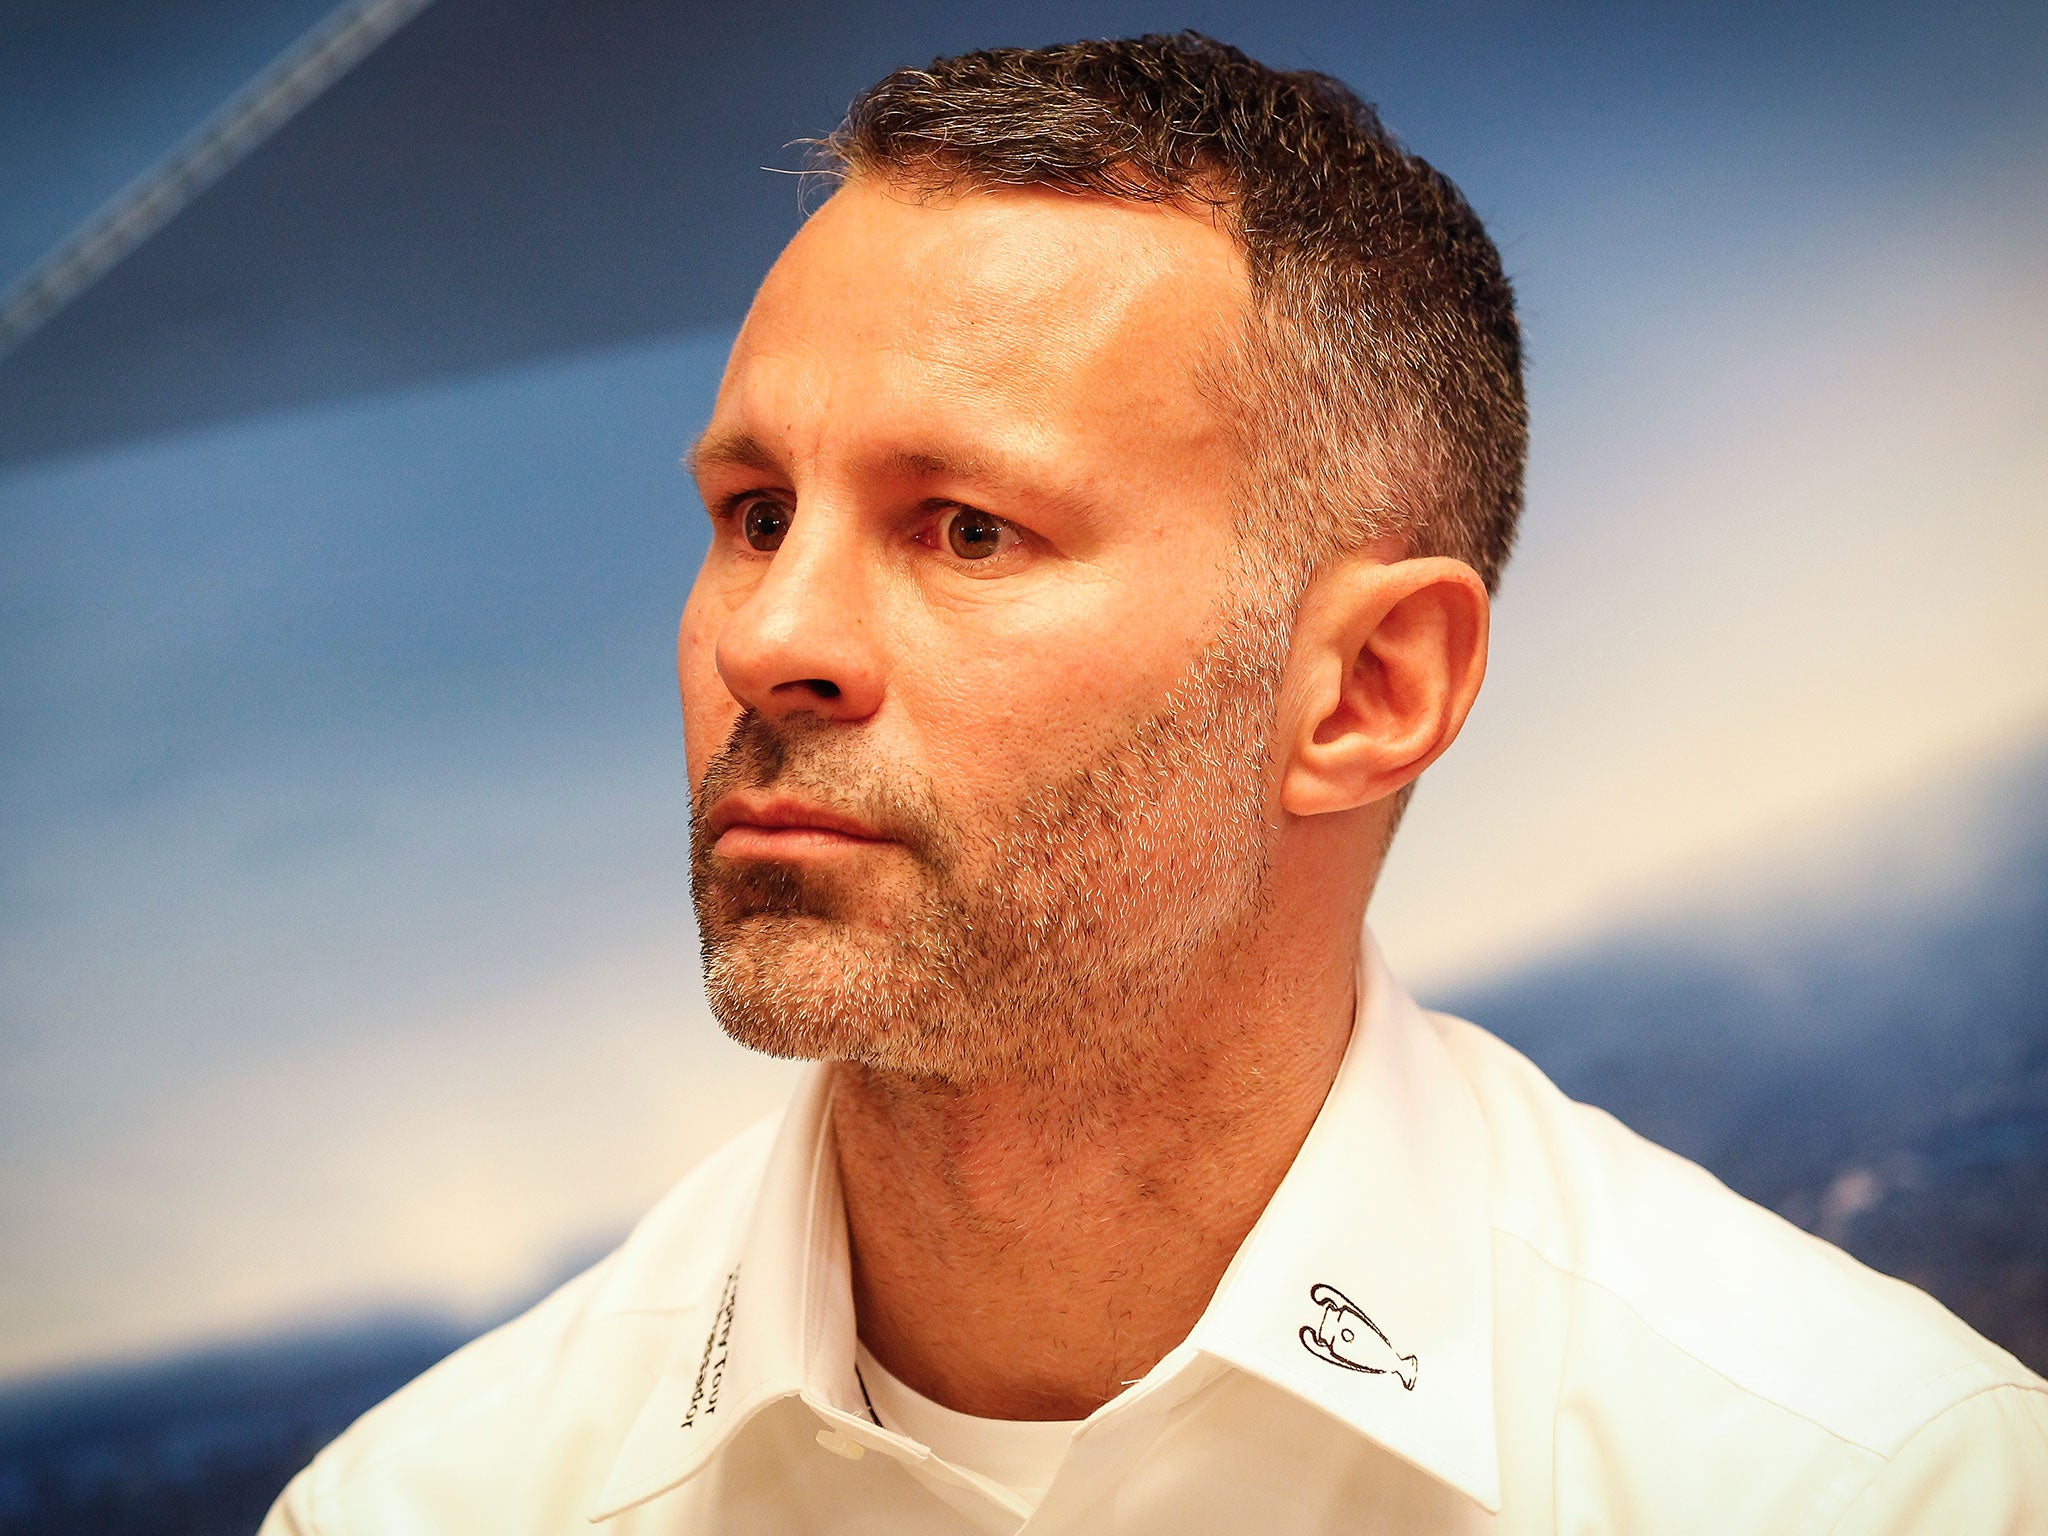  Giggs is understood to have pulled out of the running for the vacant Wigan position